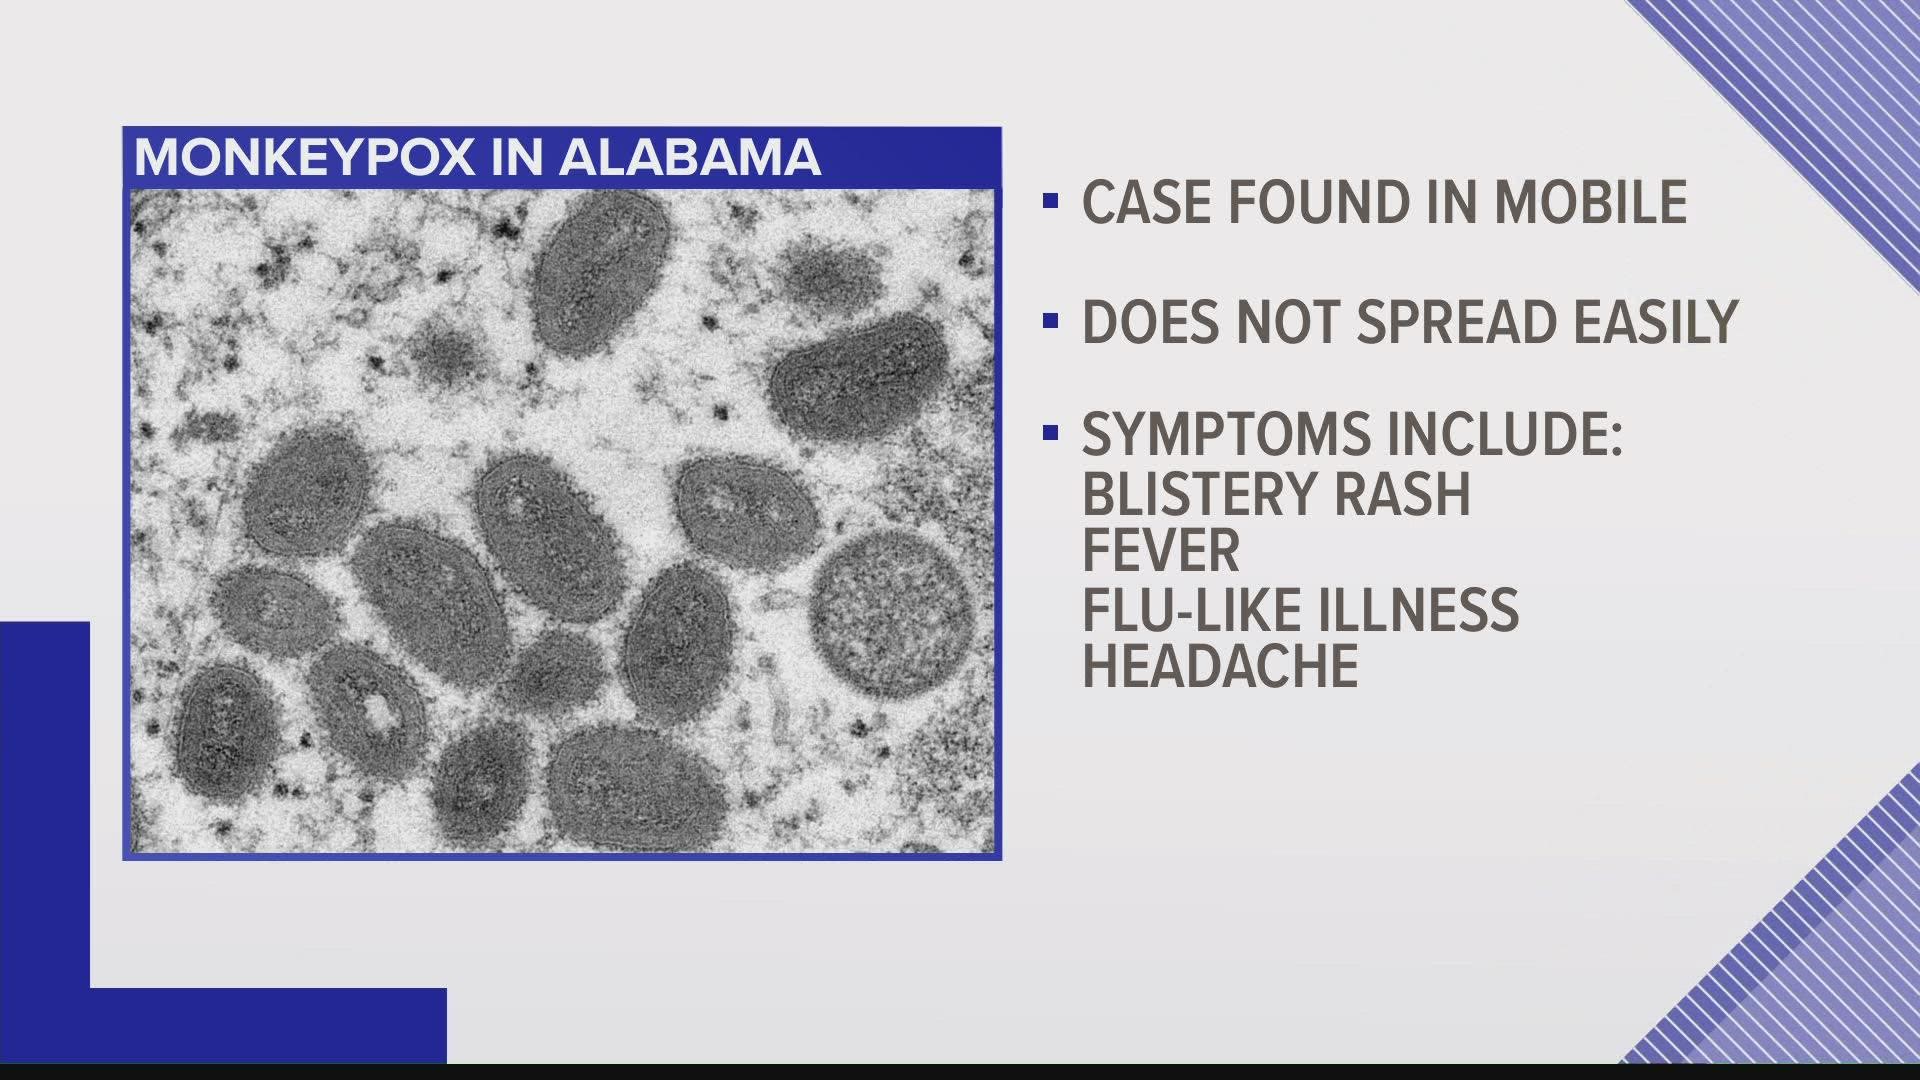 A 4th case of MonkeyPox virus infection has been identified in Mobile County.